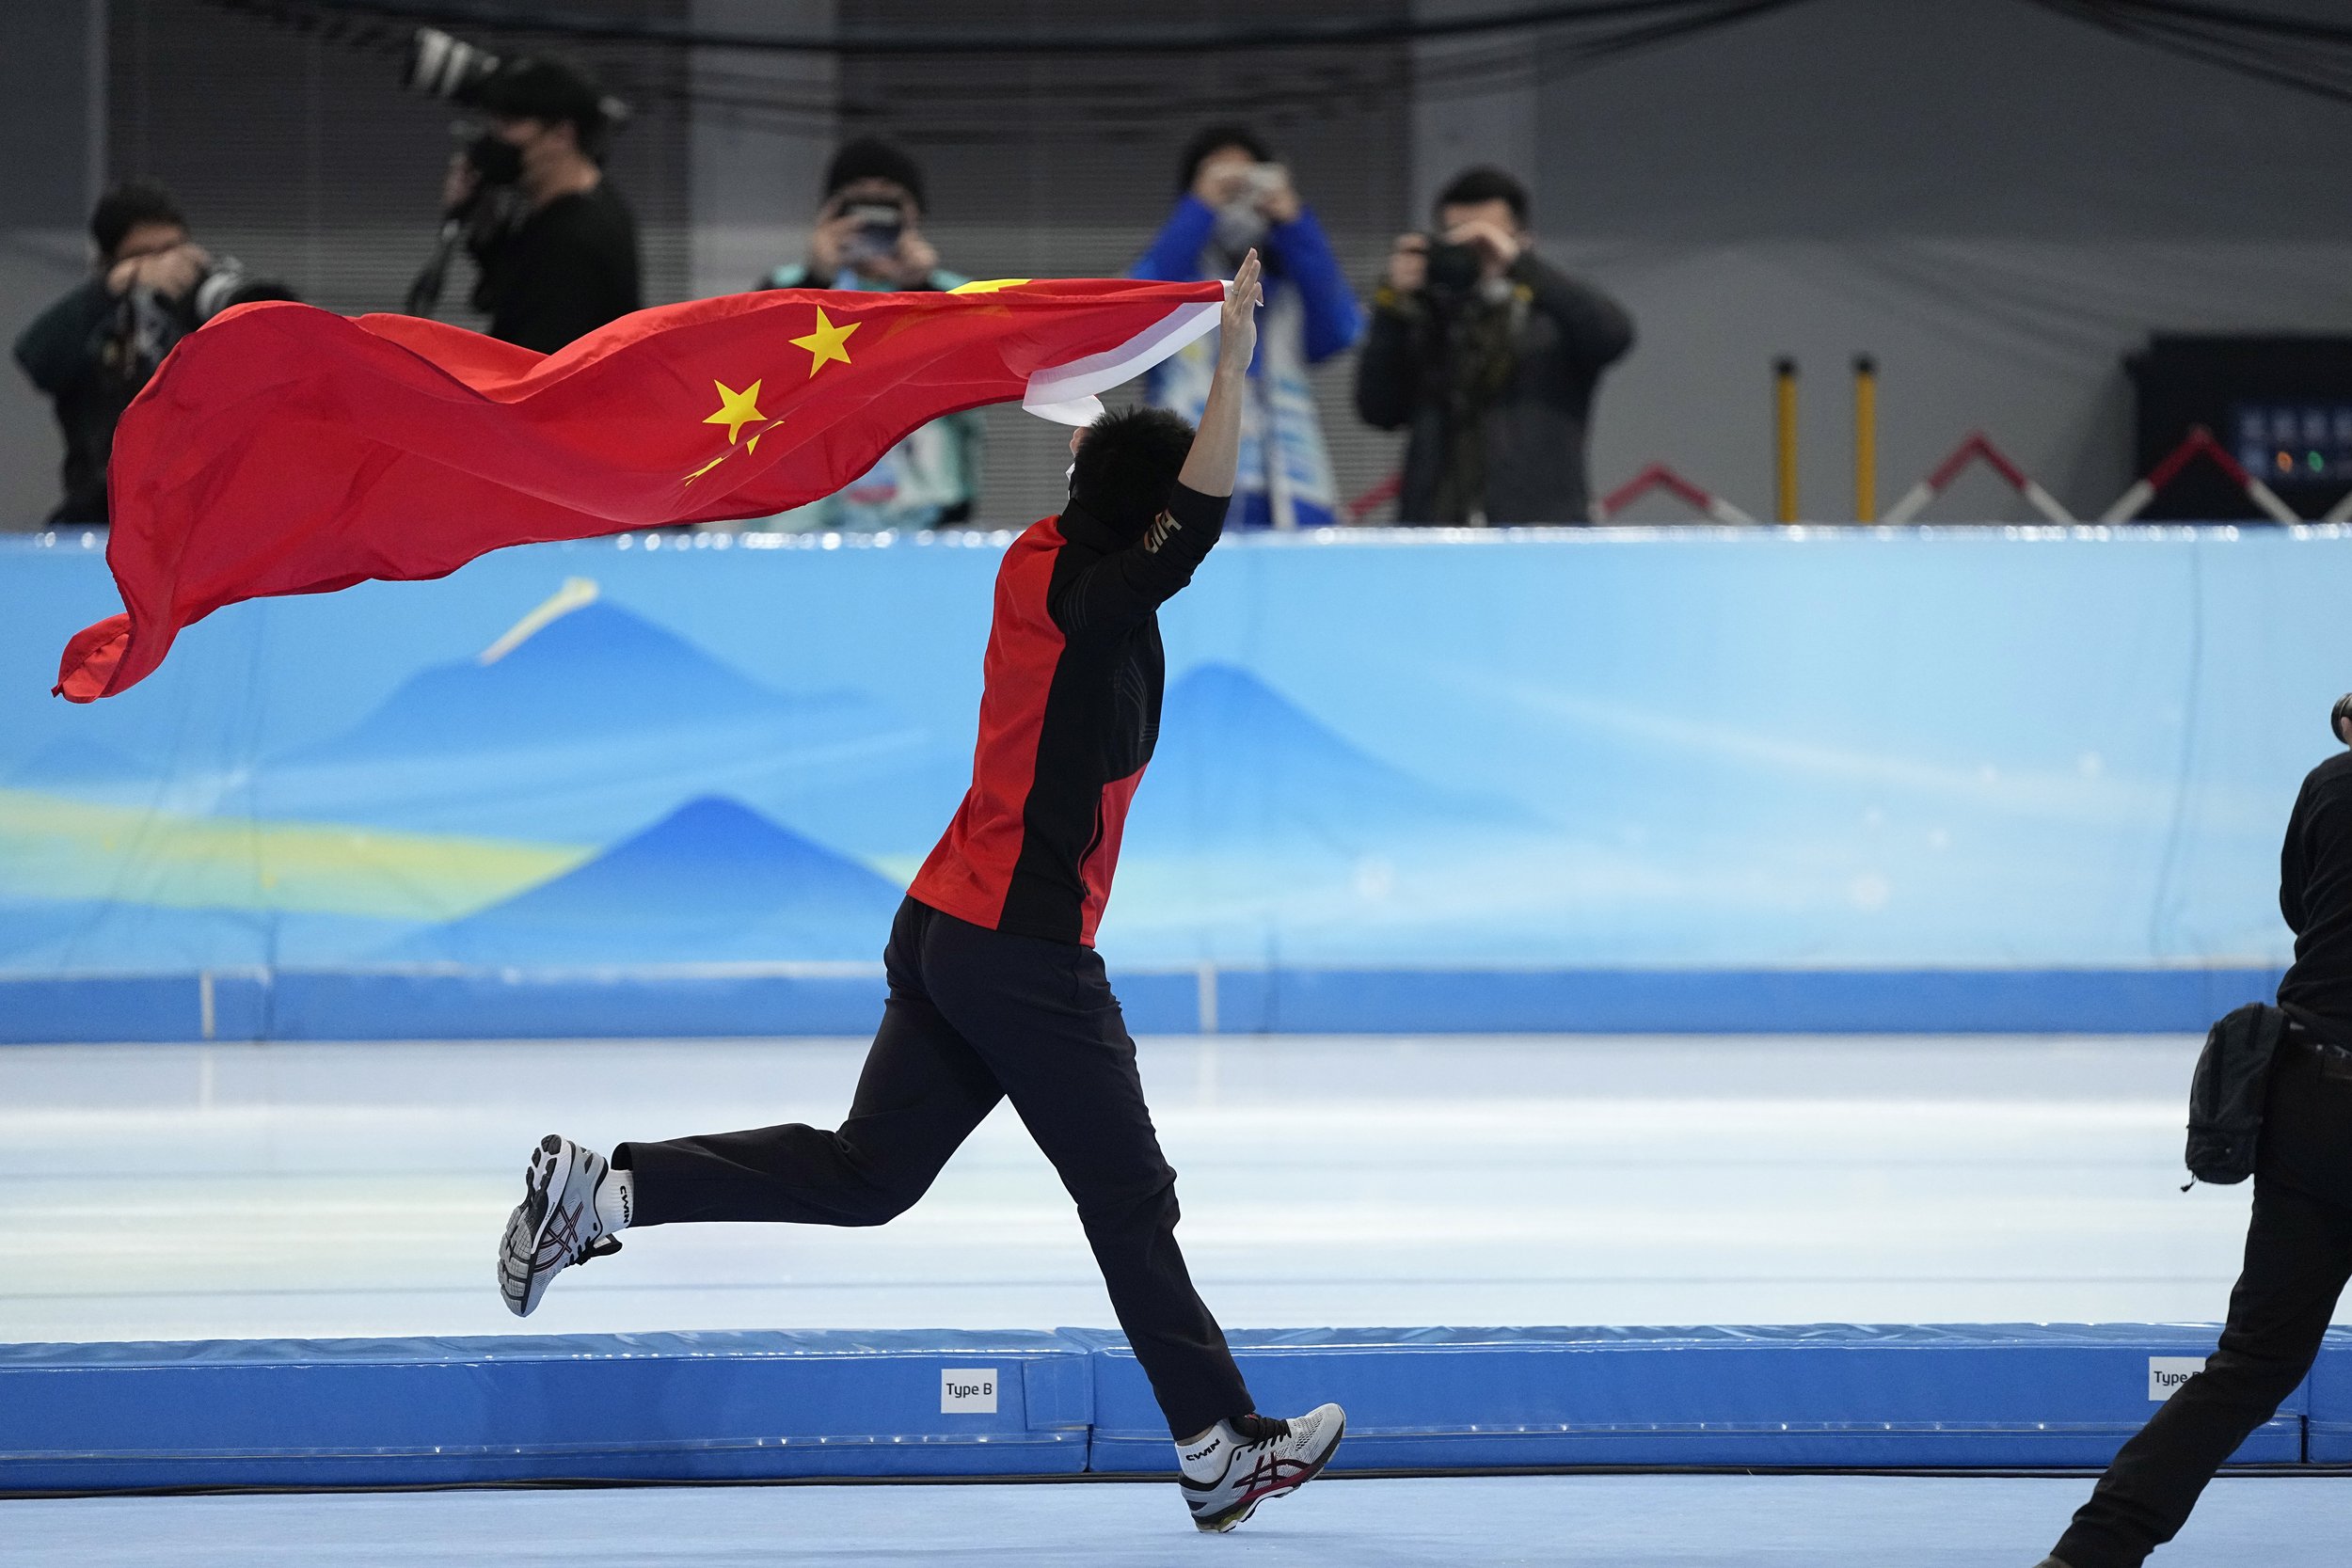  Gao Tingyu of China carries his country's flag after winning the gold medal and setting an Olympic record in the men's speedskating 500-meter race at the 2022 Winter Olympics, Saturday, Feb. 12, 2022, in Beijing. (AP Photo/Ashley Landis) 